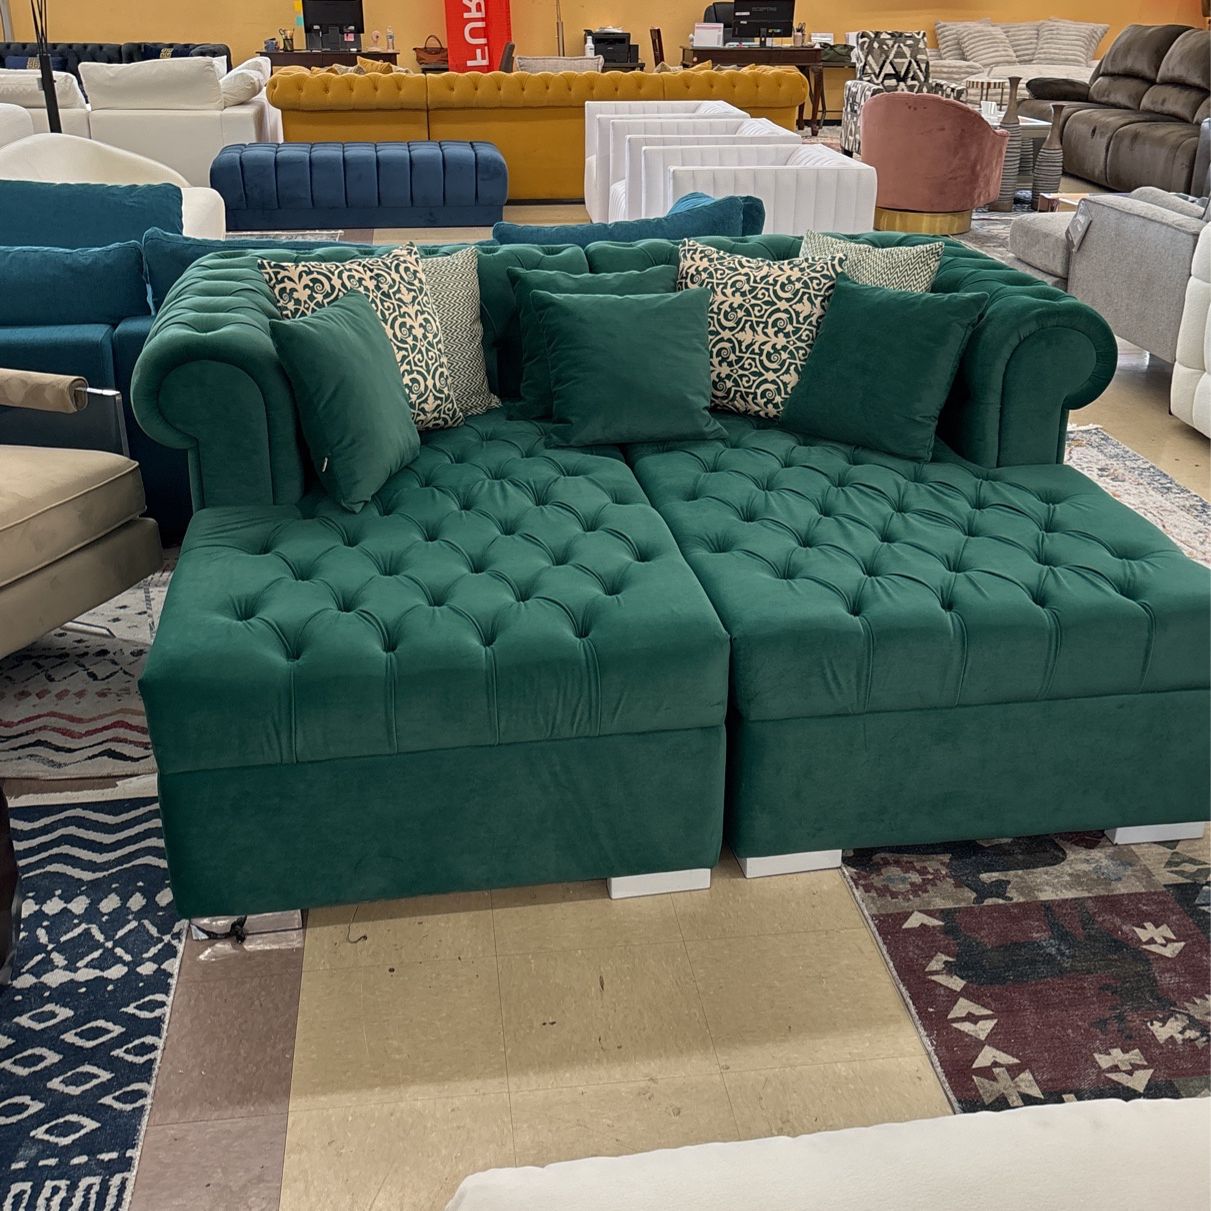 SALE SALE SALE Green Velvet Tufted Double Chaise Sectional Sofa Pillows Included 🤎🌺🫶🏻